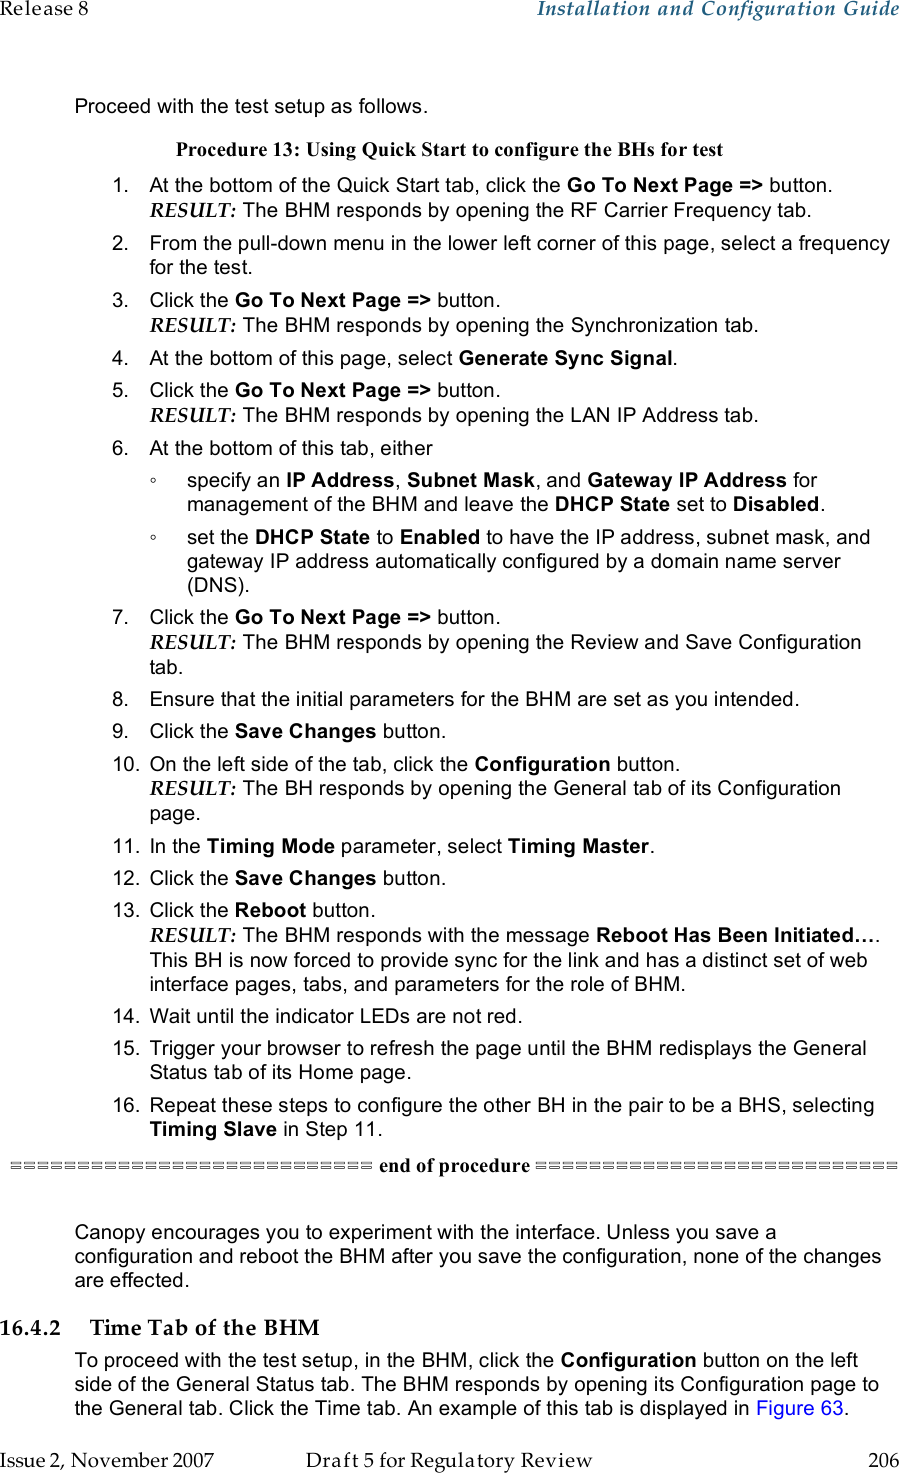 Release 8    Installation and Configuration Guide   Issue 2, November 2007  Draft 5 for Regulatory Review  206      Proceed with the test setup as follows. Procedure 13: Using Quick Start to configure the BHs for test 1.  At the bottom of the Quick Start tab, click the Go To Next Page =&gt; button. RESULT: The BHM responds by opening the RF Carrier Frequency tab. 2.  From the pull-down menu in the lower left corner of this page, select a frequency for the test. 3.  Click the Go To Next Page =&gt; button. RESULT: The BHM responds by opening the Synchronization tab. 4.  At the bottom of this page, select Generate Sync Signal. 5.  Click the Go To Next Page =&gt; button. RESULT: The BHM responds by opening the LAN IP Address tab. 6.  At the bottom of this tab, either  ◦  specify an IP Address, Subnet Mask, and Gateway IP Address for management of the BHM and leave the DHCP State set to Disabled. ◦  set the DHCP State to Enabled to have the IP address, subnet mask, and gateway IP address automatically configured by a domain name server (DNS). 7.  Click the Go To Next Page =&gt; button. RESULT: The BHM responds by opening the Review and Save Configuration tab. 8.  Ensure that the initial parameters for the BHM are set as you intended. 9.  Click the Save Changes button. 10.  On the left side of the tab, click the Configuration button. RESULT: The BH responds by opening the General tab of its Configuration page. 11.  In the Timing Mode parameter, select Timing Master.  12.  Click the Save Changes button. 13.  Click the Reboot button. RESULT: The BHM responds with the message Reboot Has Been Initiated…. This BH is now forced to provide sync for the link and has a distinct set of web interface pages, tabs, and parameters for the role of BHM. 14.  Wait until the indicator LEDs are not red. 15.  Trigger your browser to refresh the page until the BHM redisplays the General Status tab of its Home page. 16.  Repeat these steps to configure the other BH in the pair to be a BHS, selecting Timing Slave in Step 11. =========================== end of procedure ===========================  Canopy encourages you to experiment with the interface. Unless you save a configuration and reboot the BHM after you save the configuration, none of the changes are effected. 16.4.2 Time Tab of the BHM To proceed with the test setup, in the BHM, click the Configuration button on the left side of the General Status tab. The BHM responds by opening its Configuration page to the General tab. Click the Time tab. An example of this tab is displayed in Figure 63. 